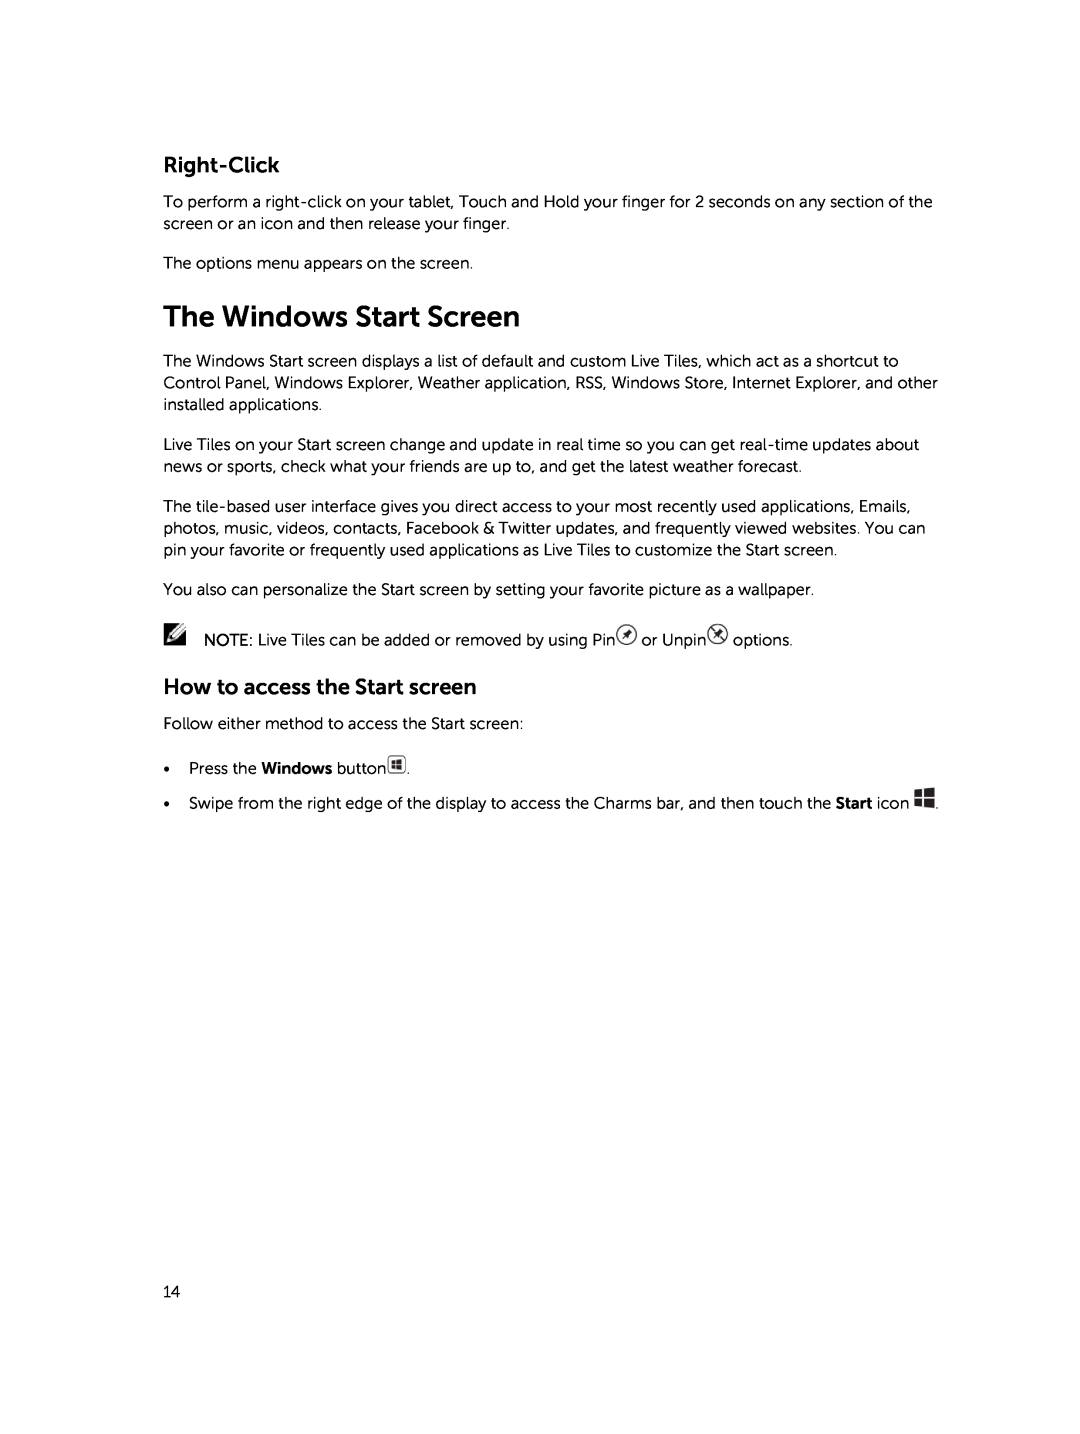 Dell T06G manual The Windows Start Screen, Right-Click, How to access the Start screen 